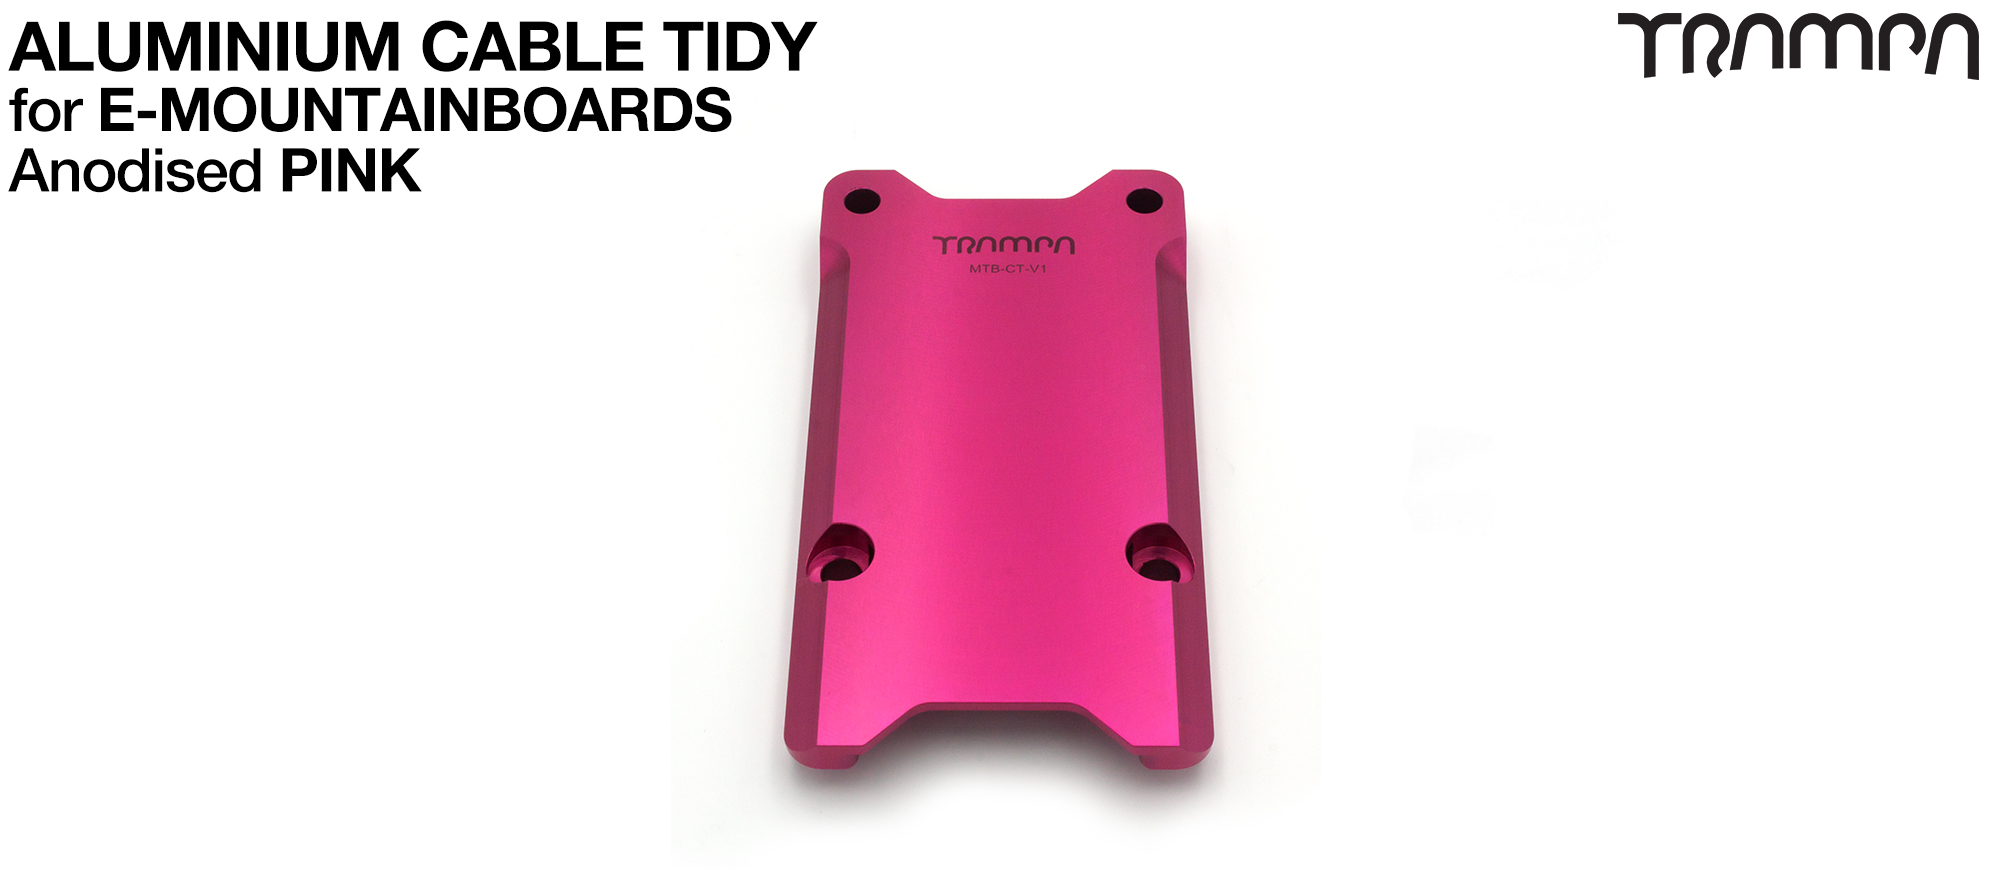 REAR CABLE Router Anodised - PINK 